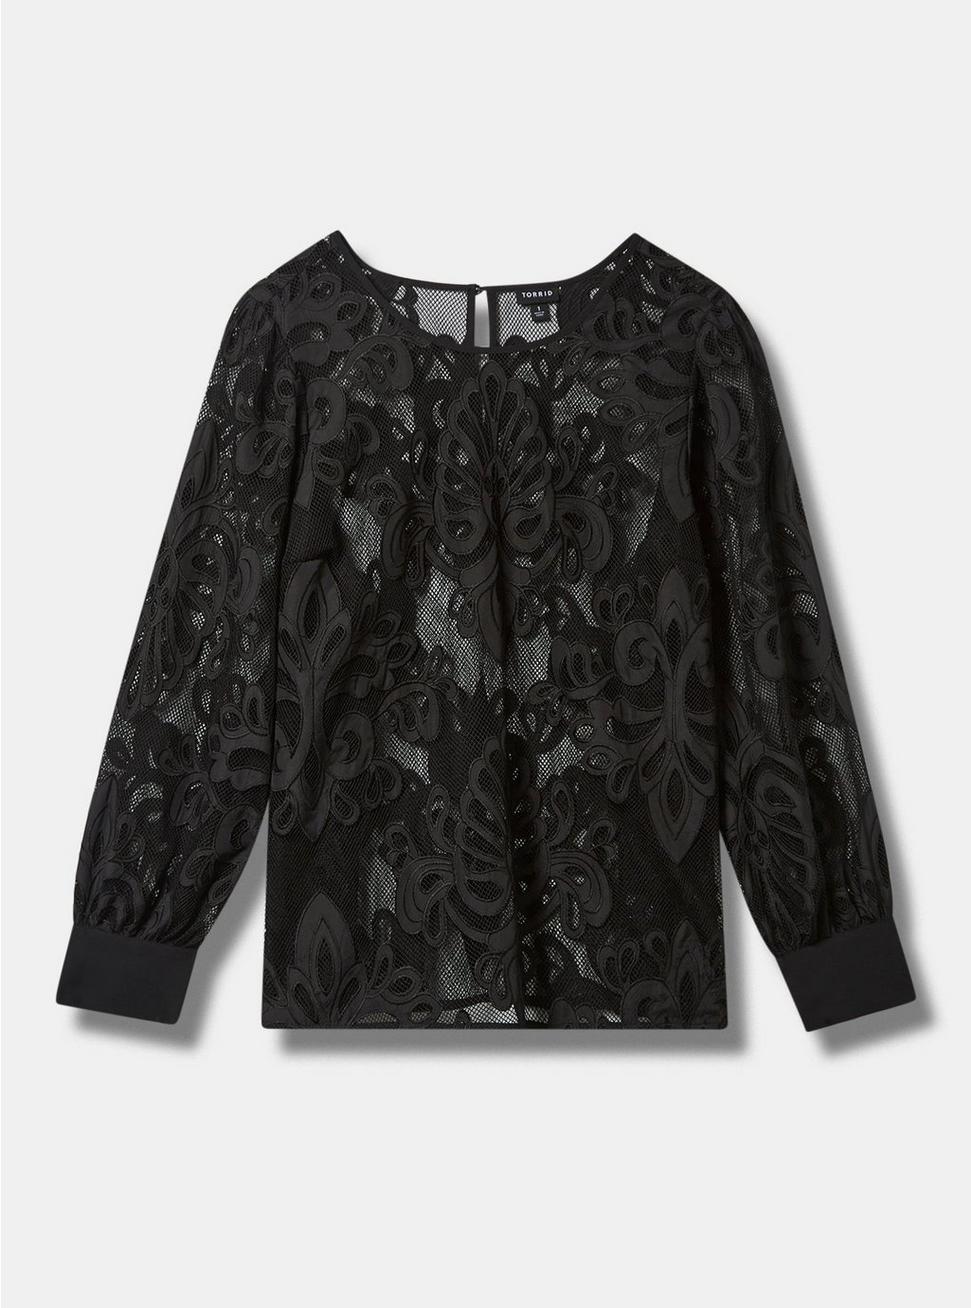 Mesh With Embroidery Long Sleeve Blouse, DEEP BLACK, hi-res